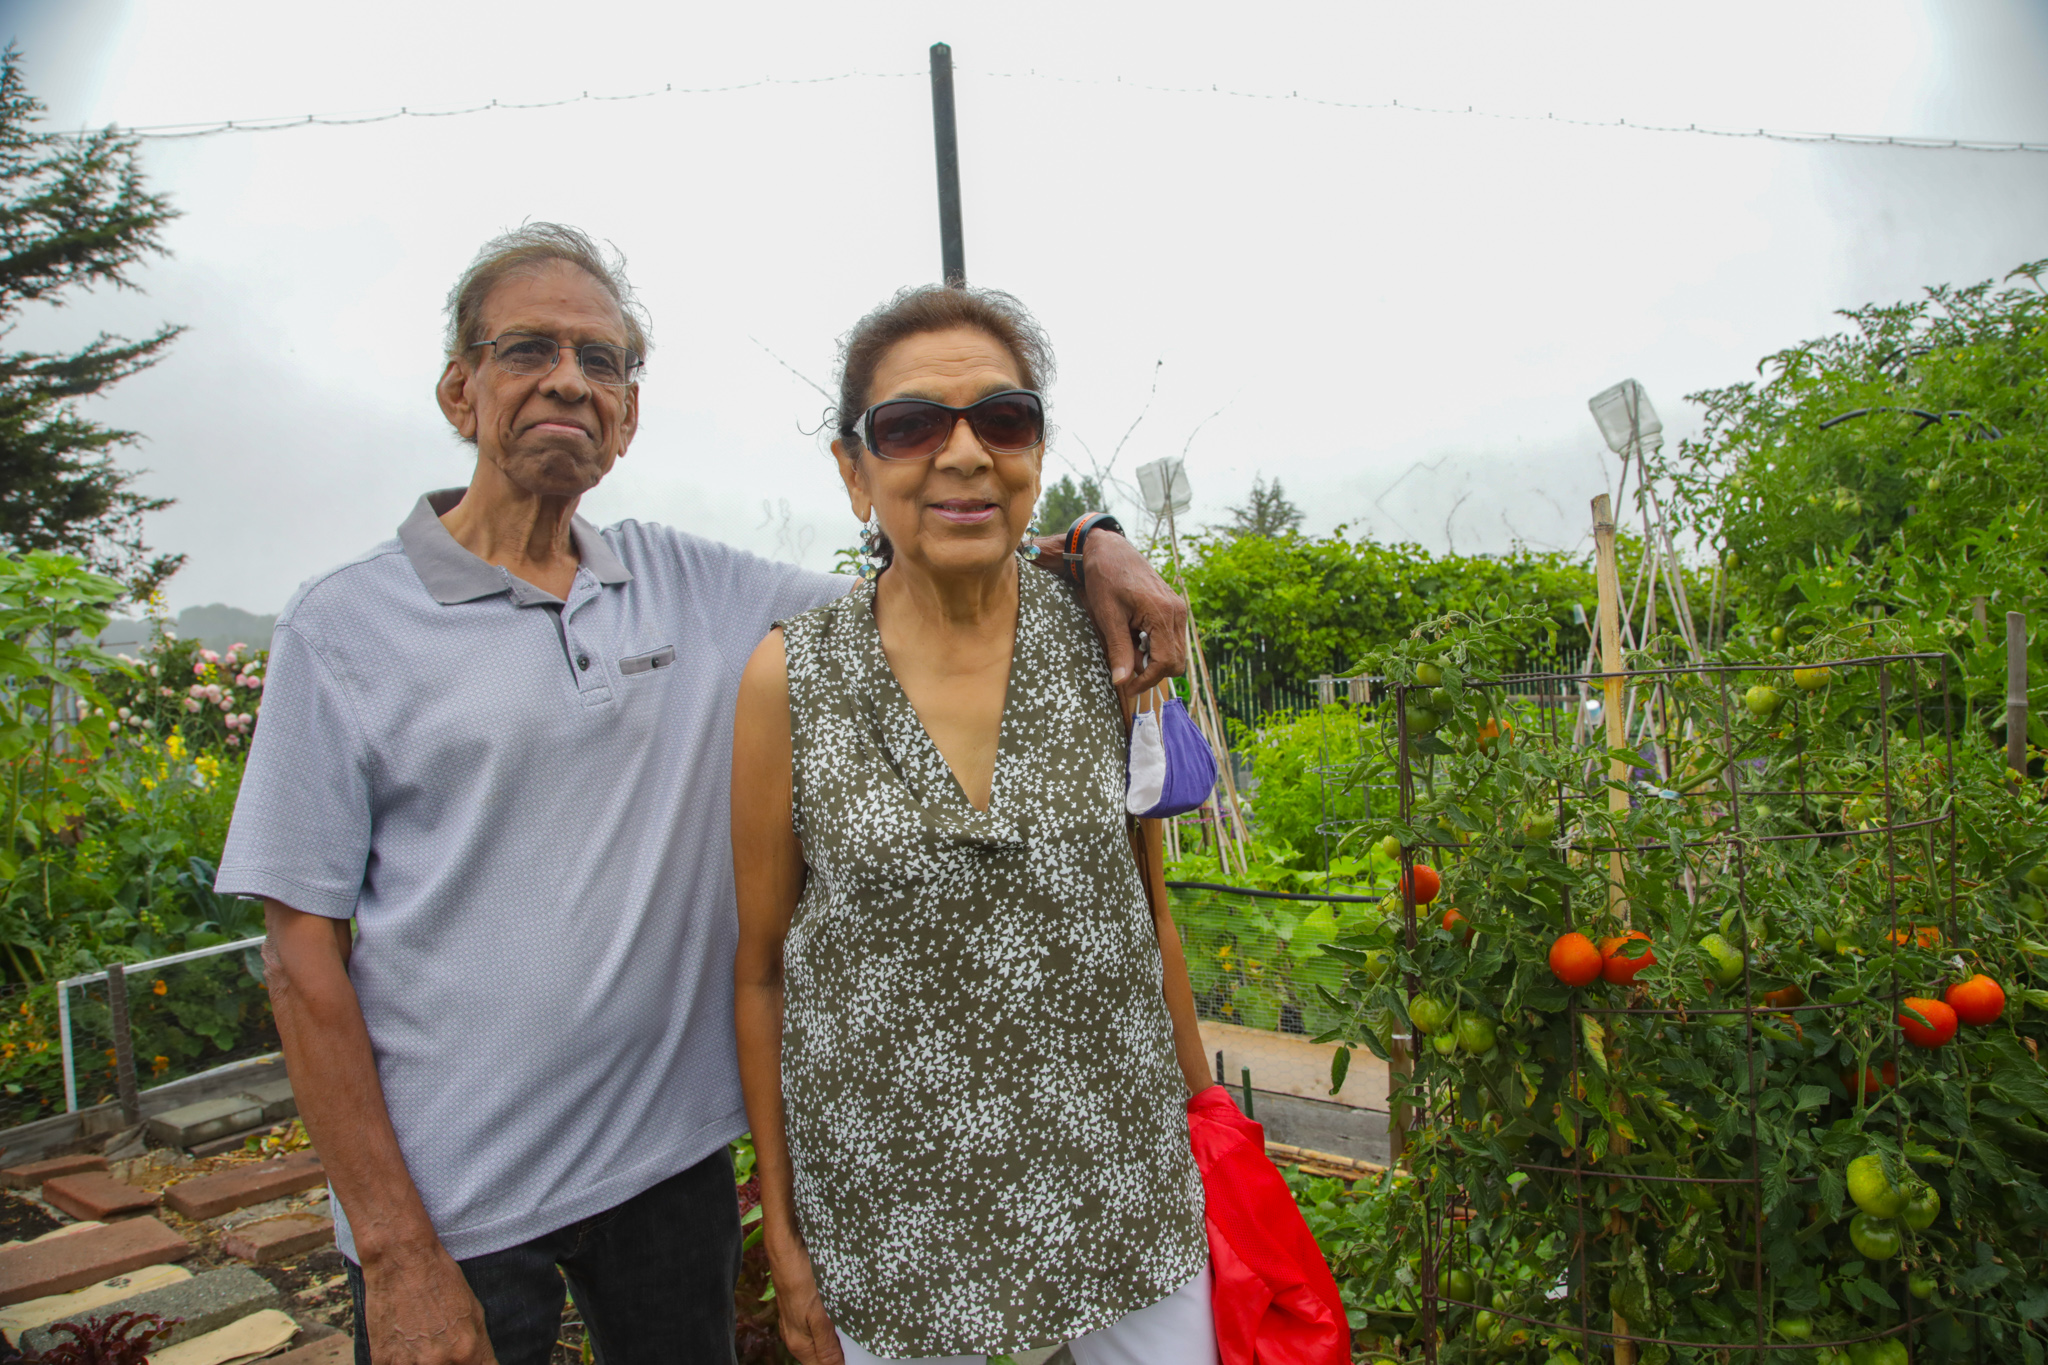 A man, Vasant, has his arm around his wife, Sharda while they stand next to ripening tomato plants in their P-Patch garden plot.